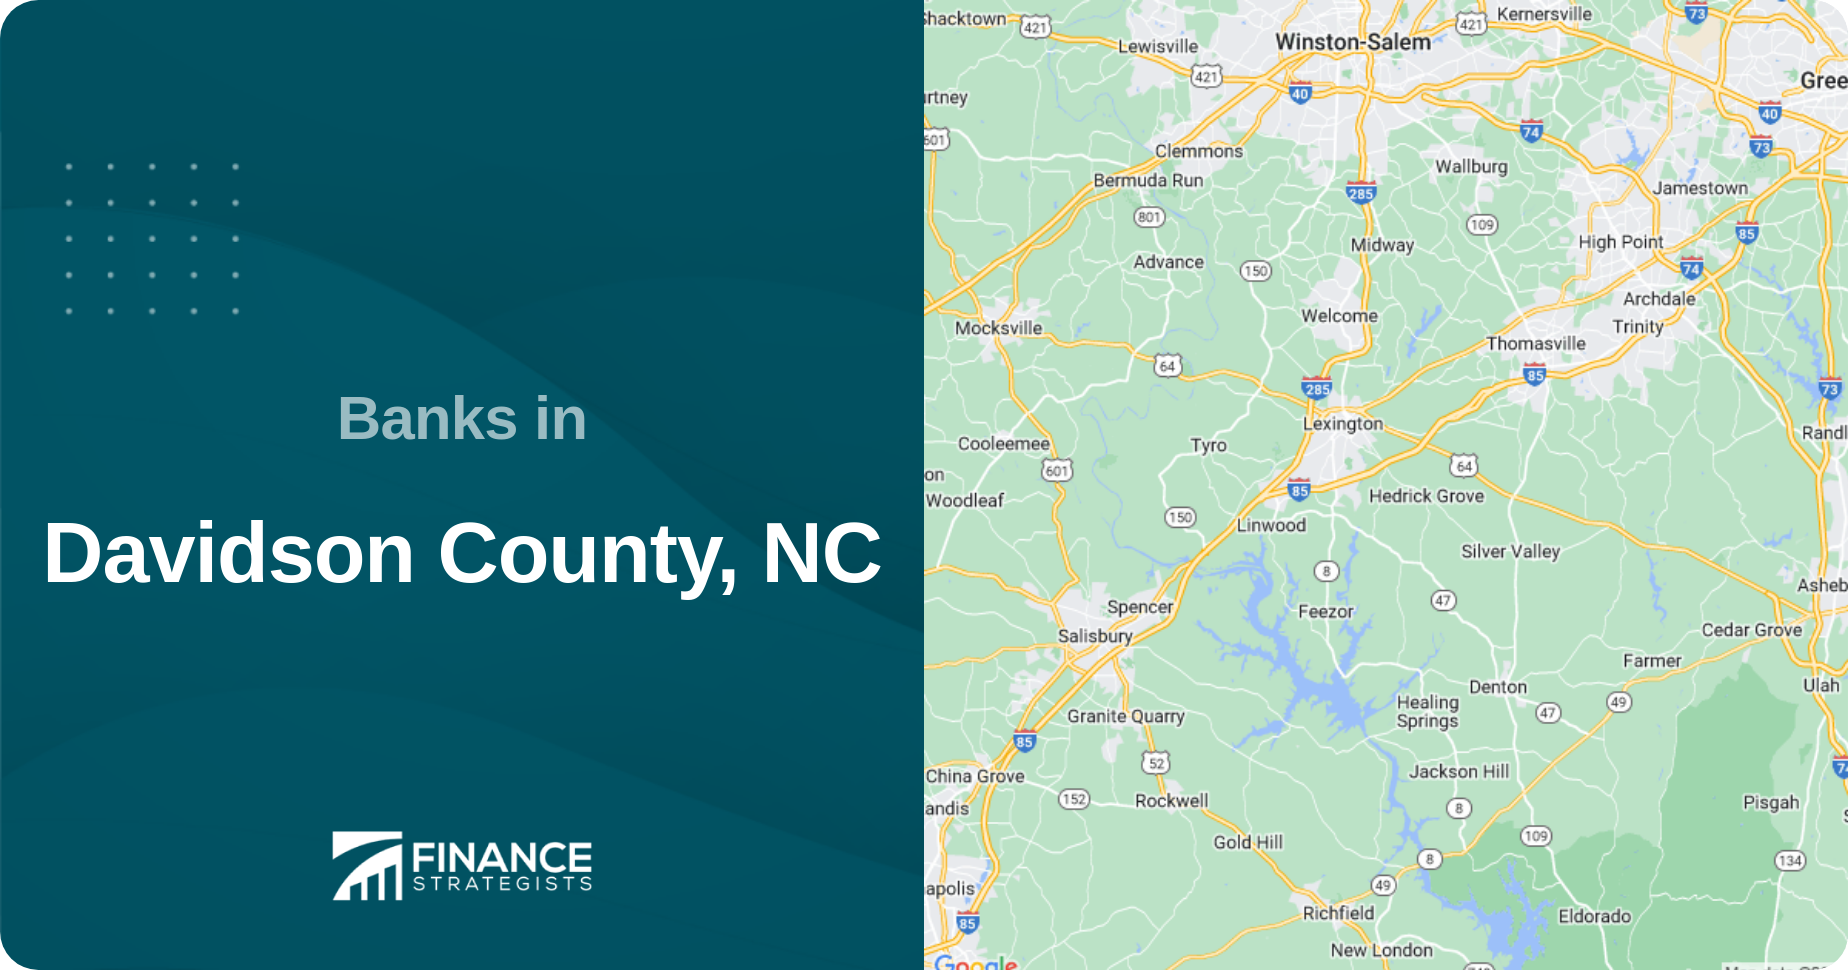 Banks in Davidson County, NC